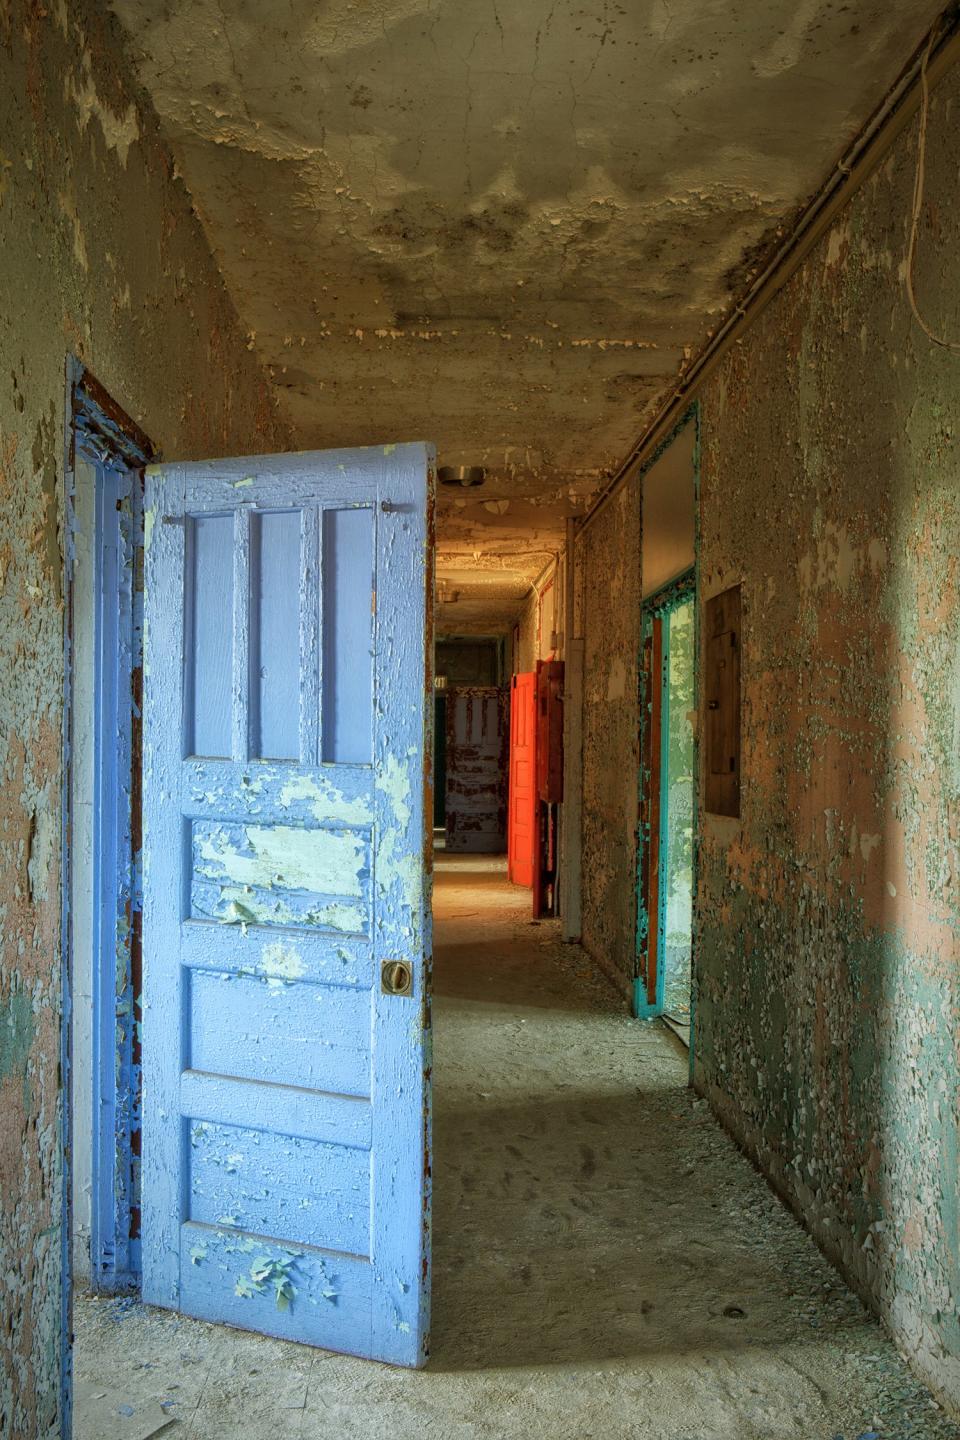 Franklin photographer Rebecca Skinner photographs abandoned spaces throughout the United States. She says, "Texture, color and light play an important part in my image making and I am attracted to the beauty of these places as well as the forgotten history." 
See here is her photograph "West Hallway," photograph printed on aluminum.